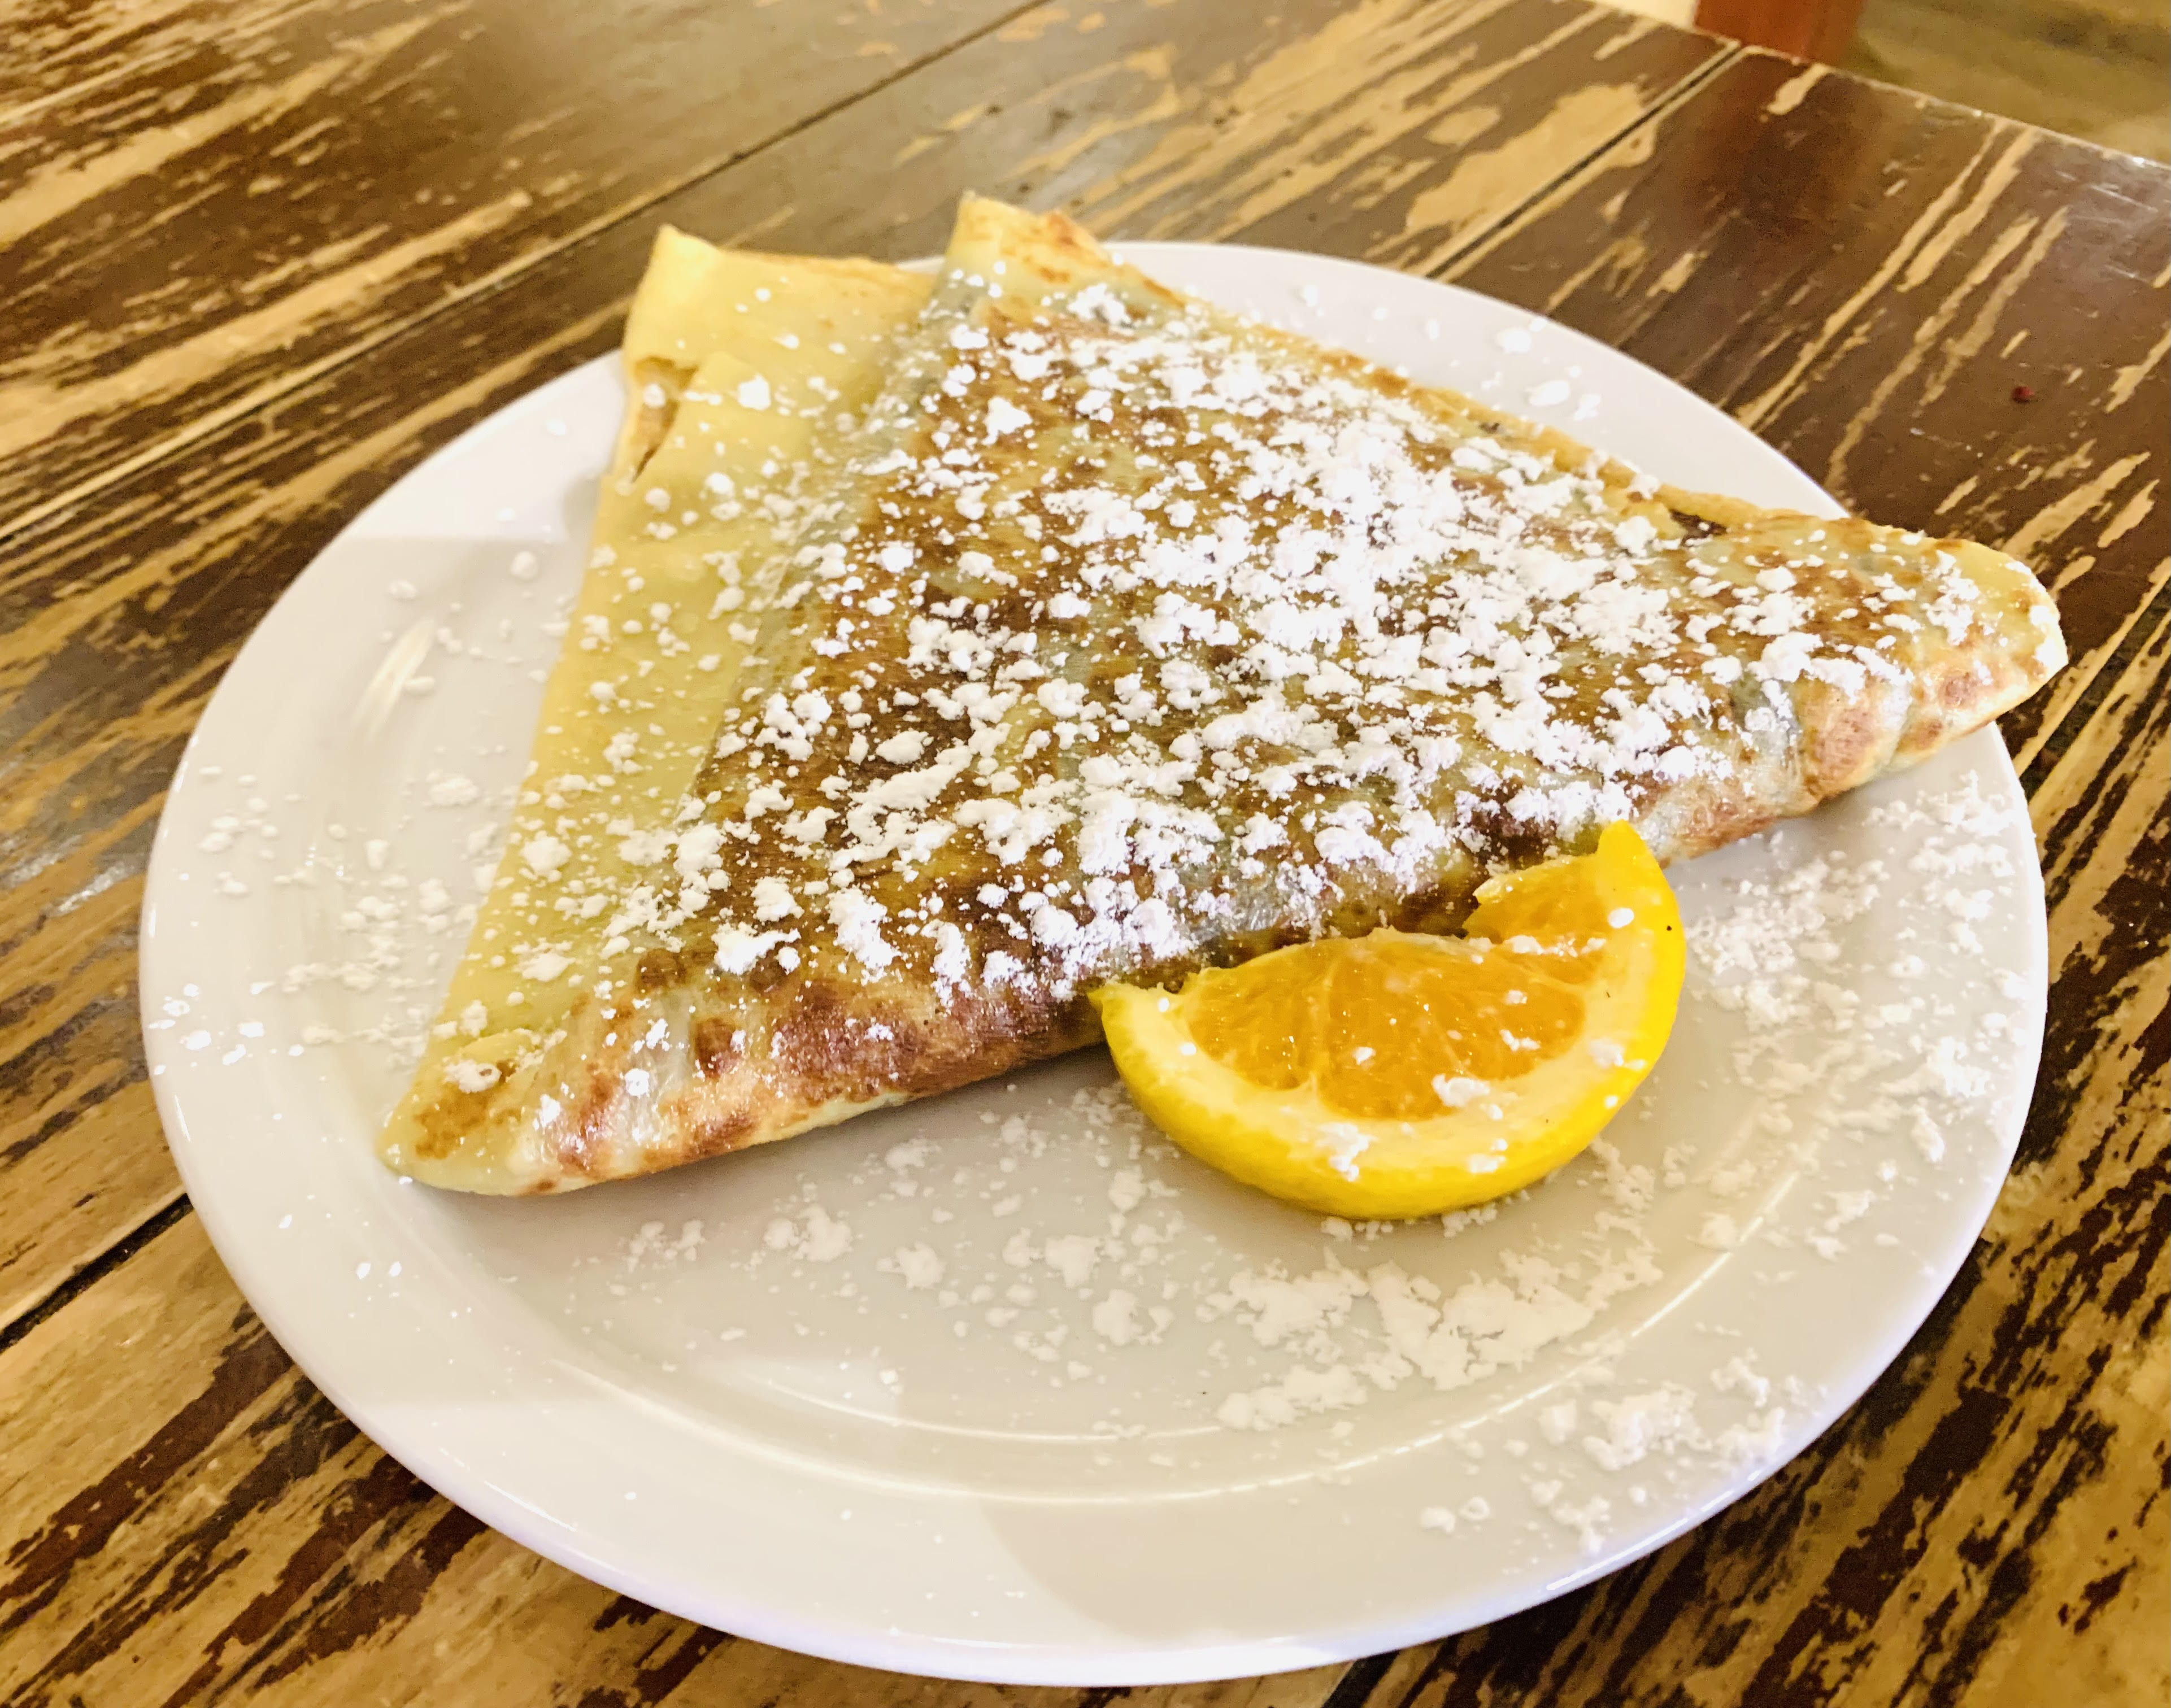 Nutella crepe (Featured as one of the best restaurants in Whitefish, Montana by top US family travel blog, Travel With A Plan!)